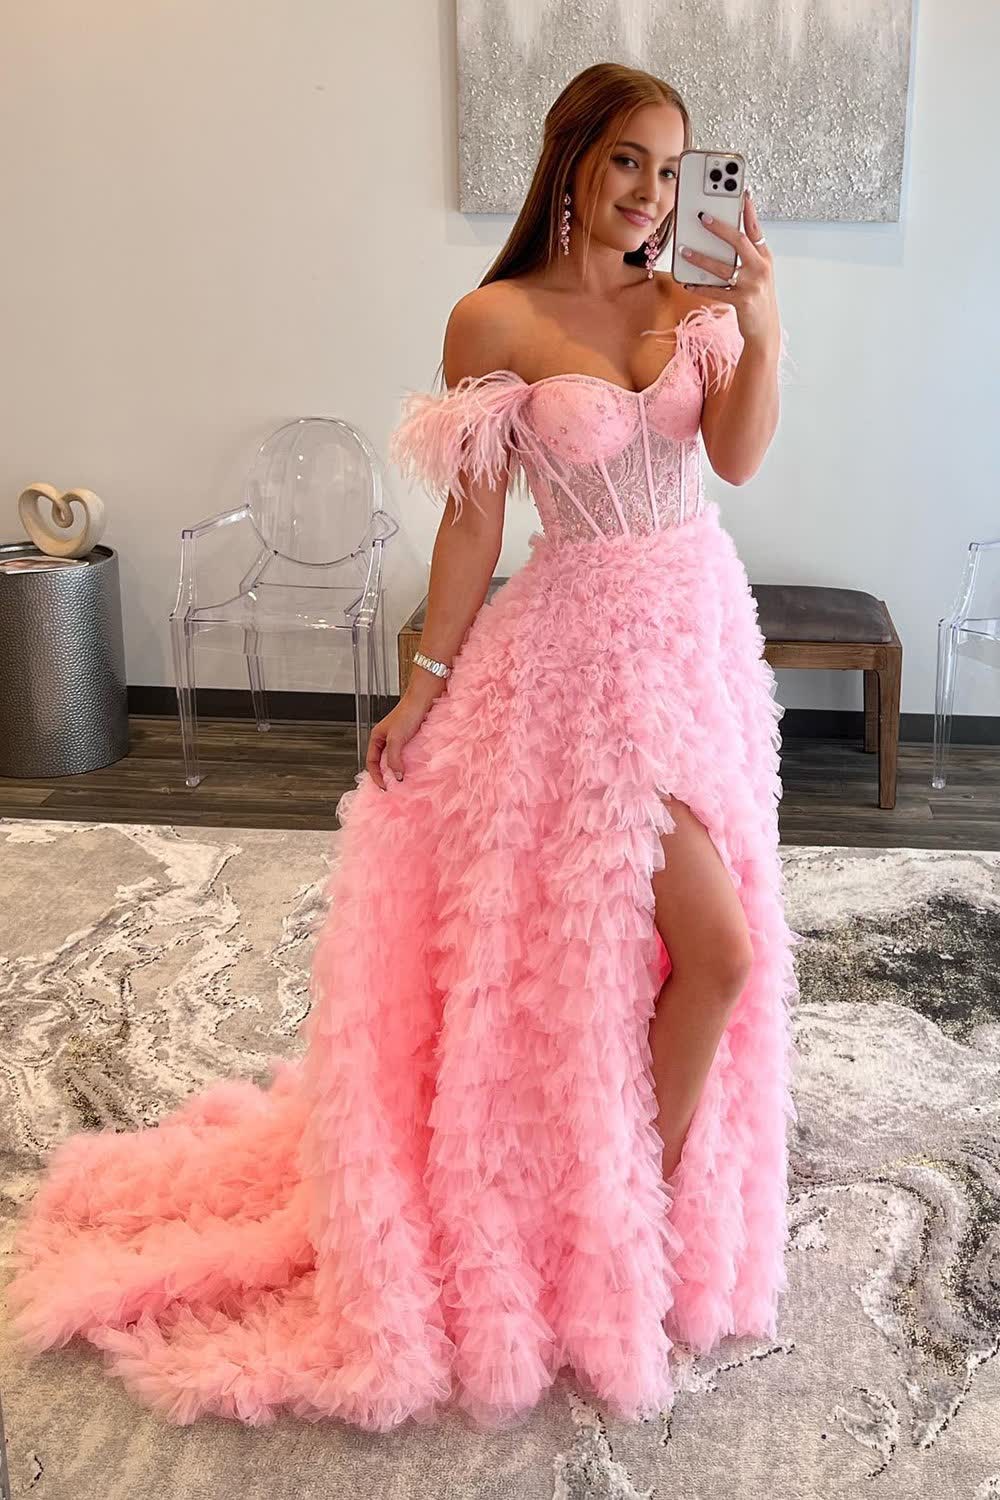 Princess A Line Off the Shoulder Pink Long Corset Prom Dress with Feather outfit, Princess A Line Off the Shoulder Pink Long Prom Dress with Feather